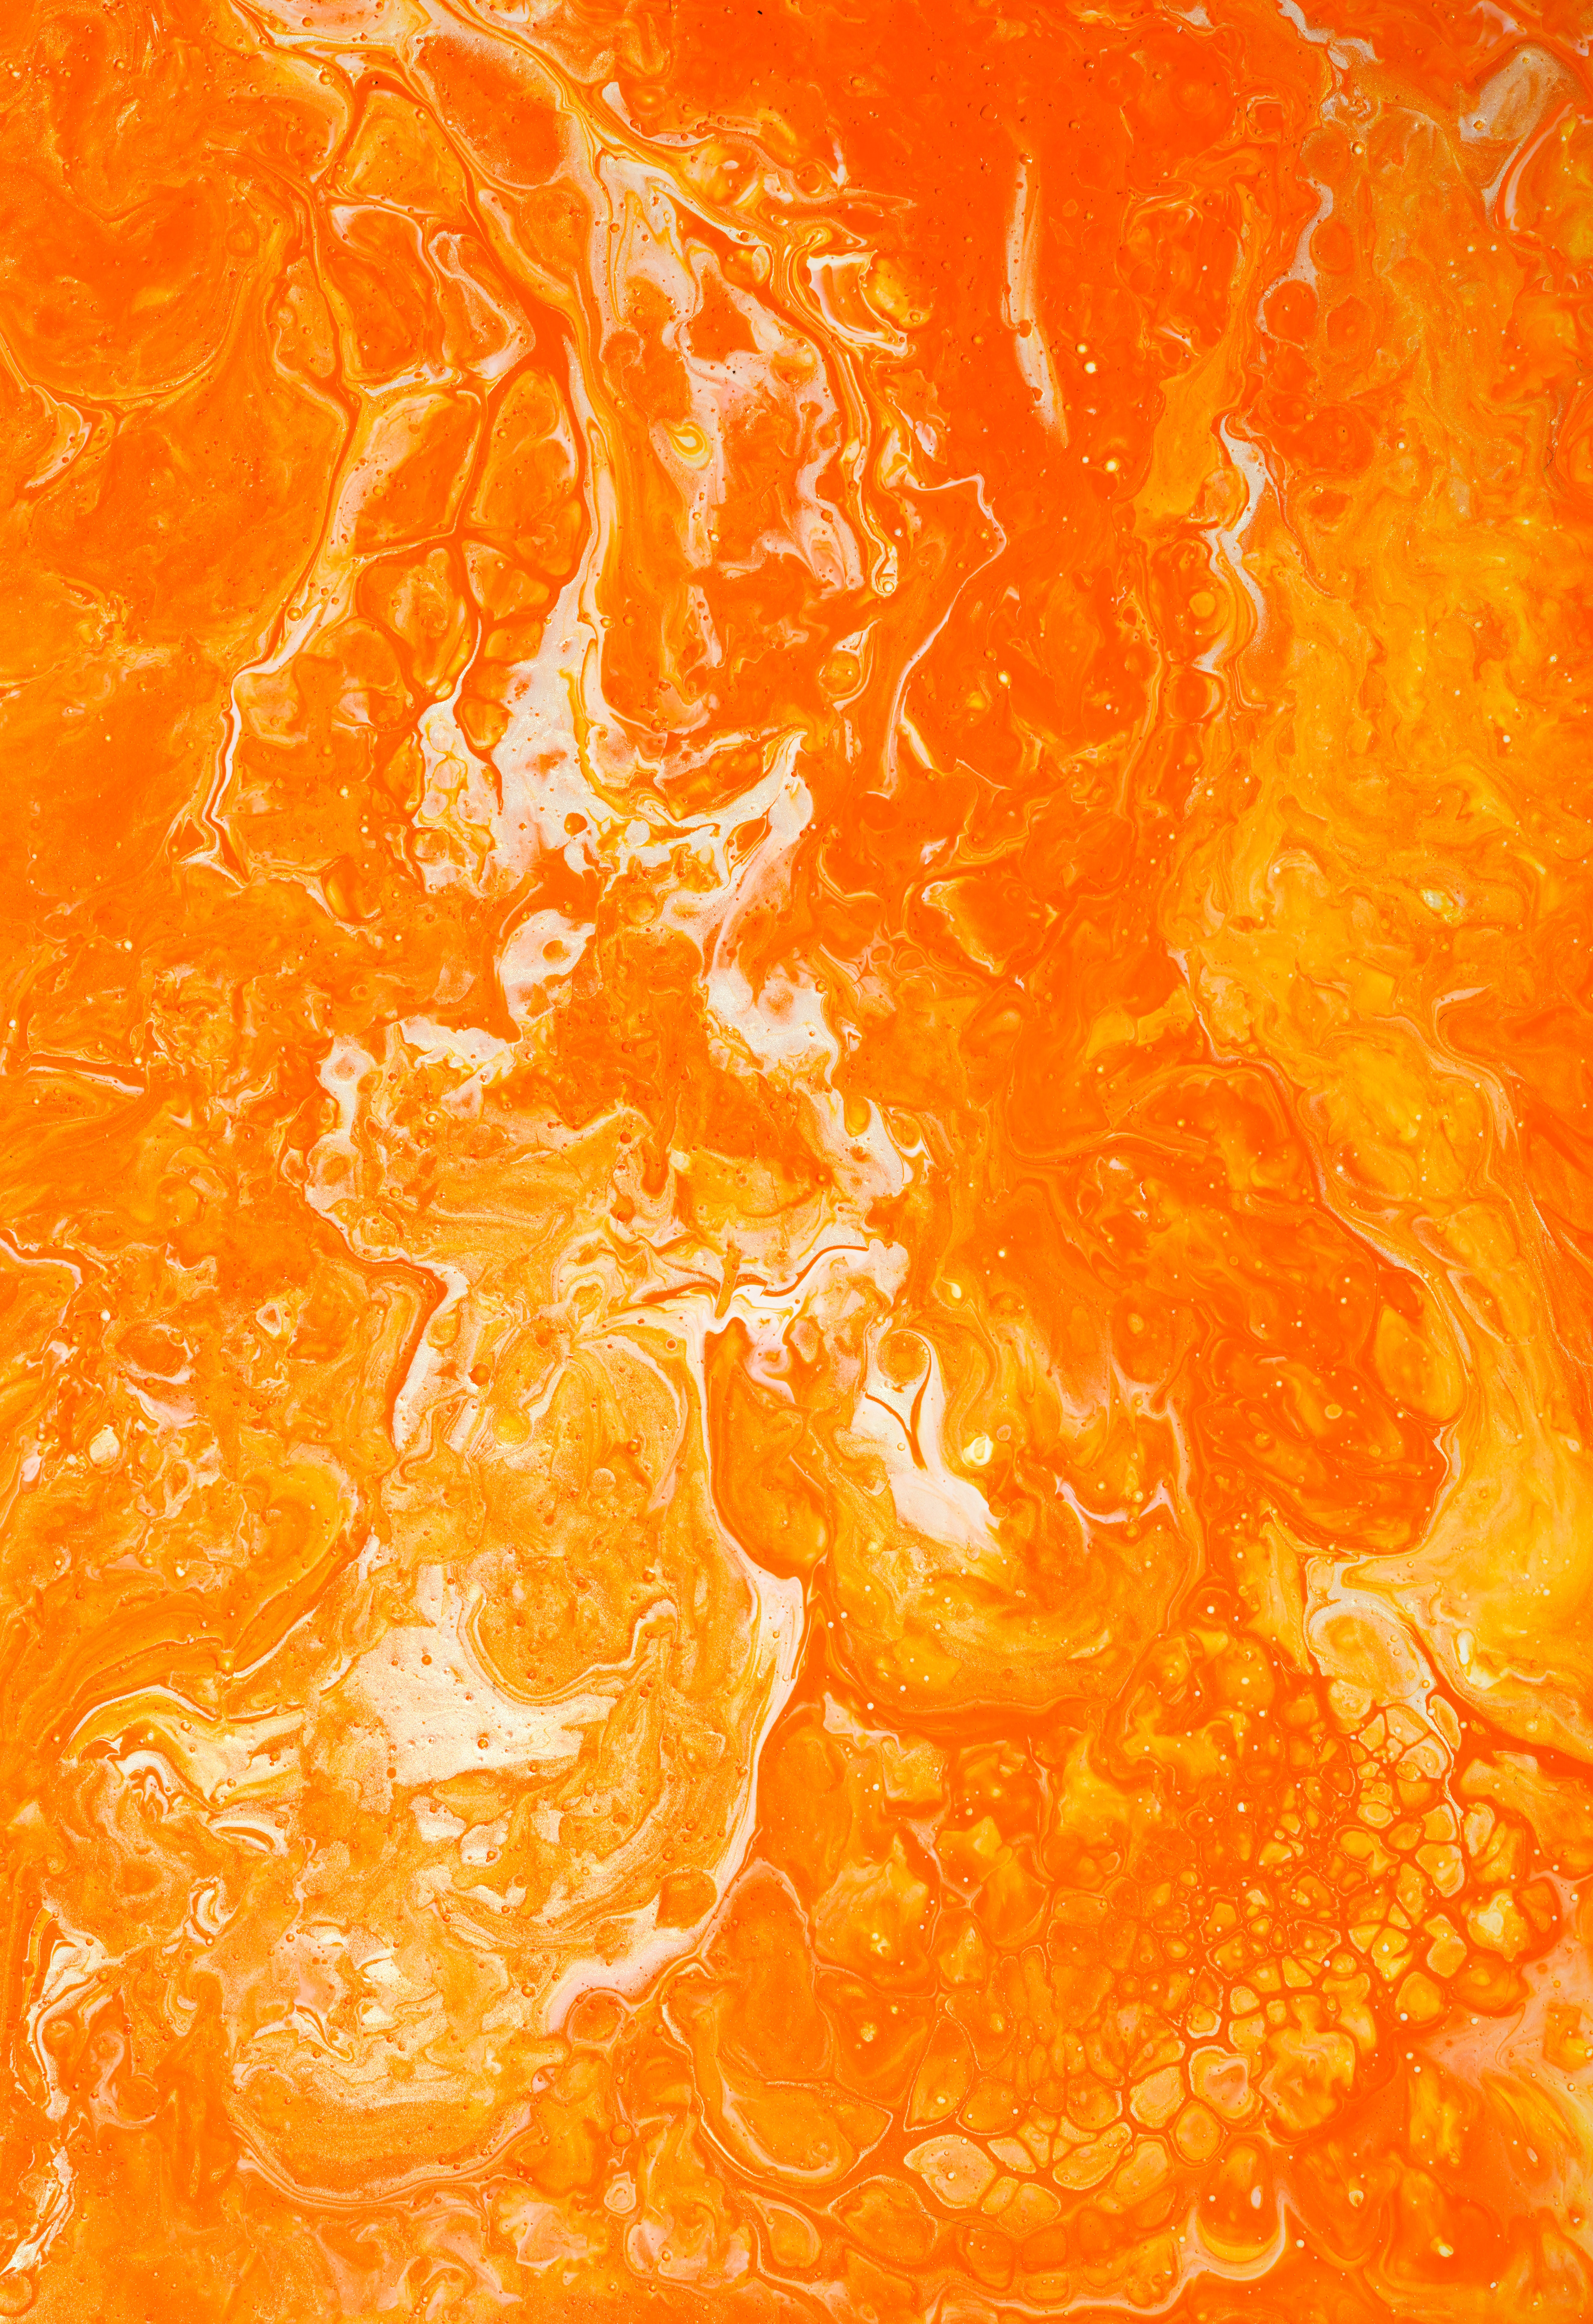 90073 free download Orange wallpapers for phone, divorces, bright, abstract, paint Orange images and screensavers for mobile